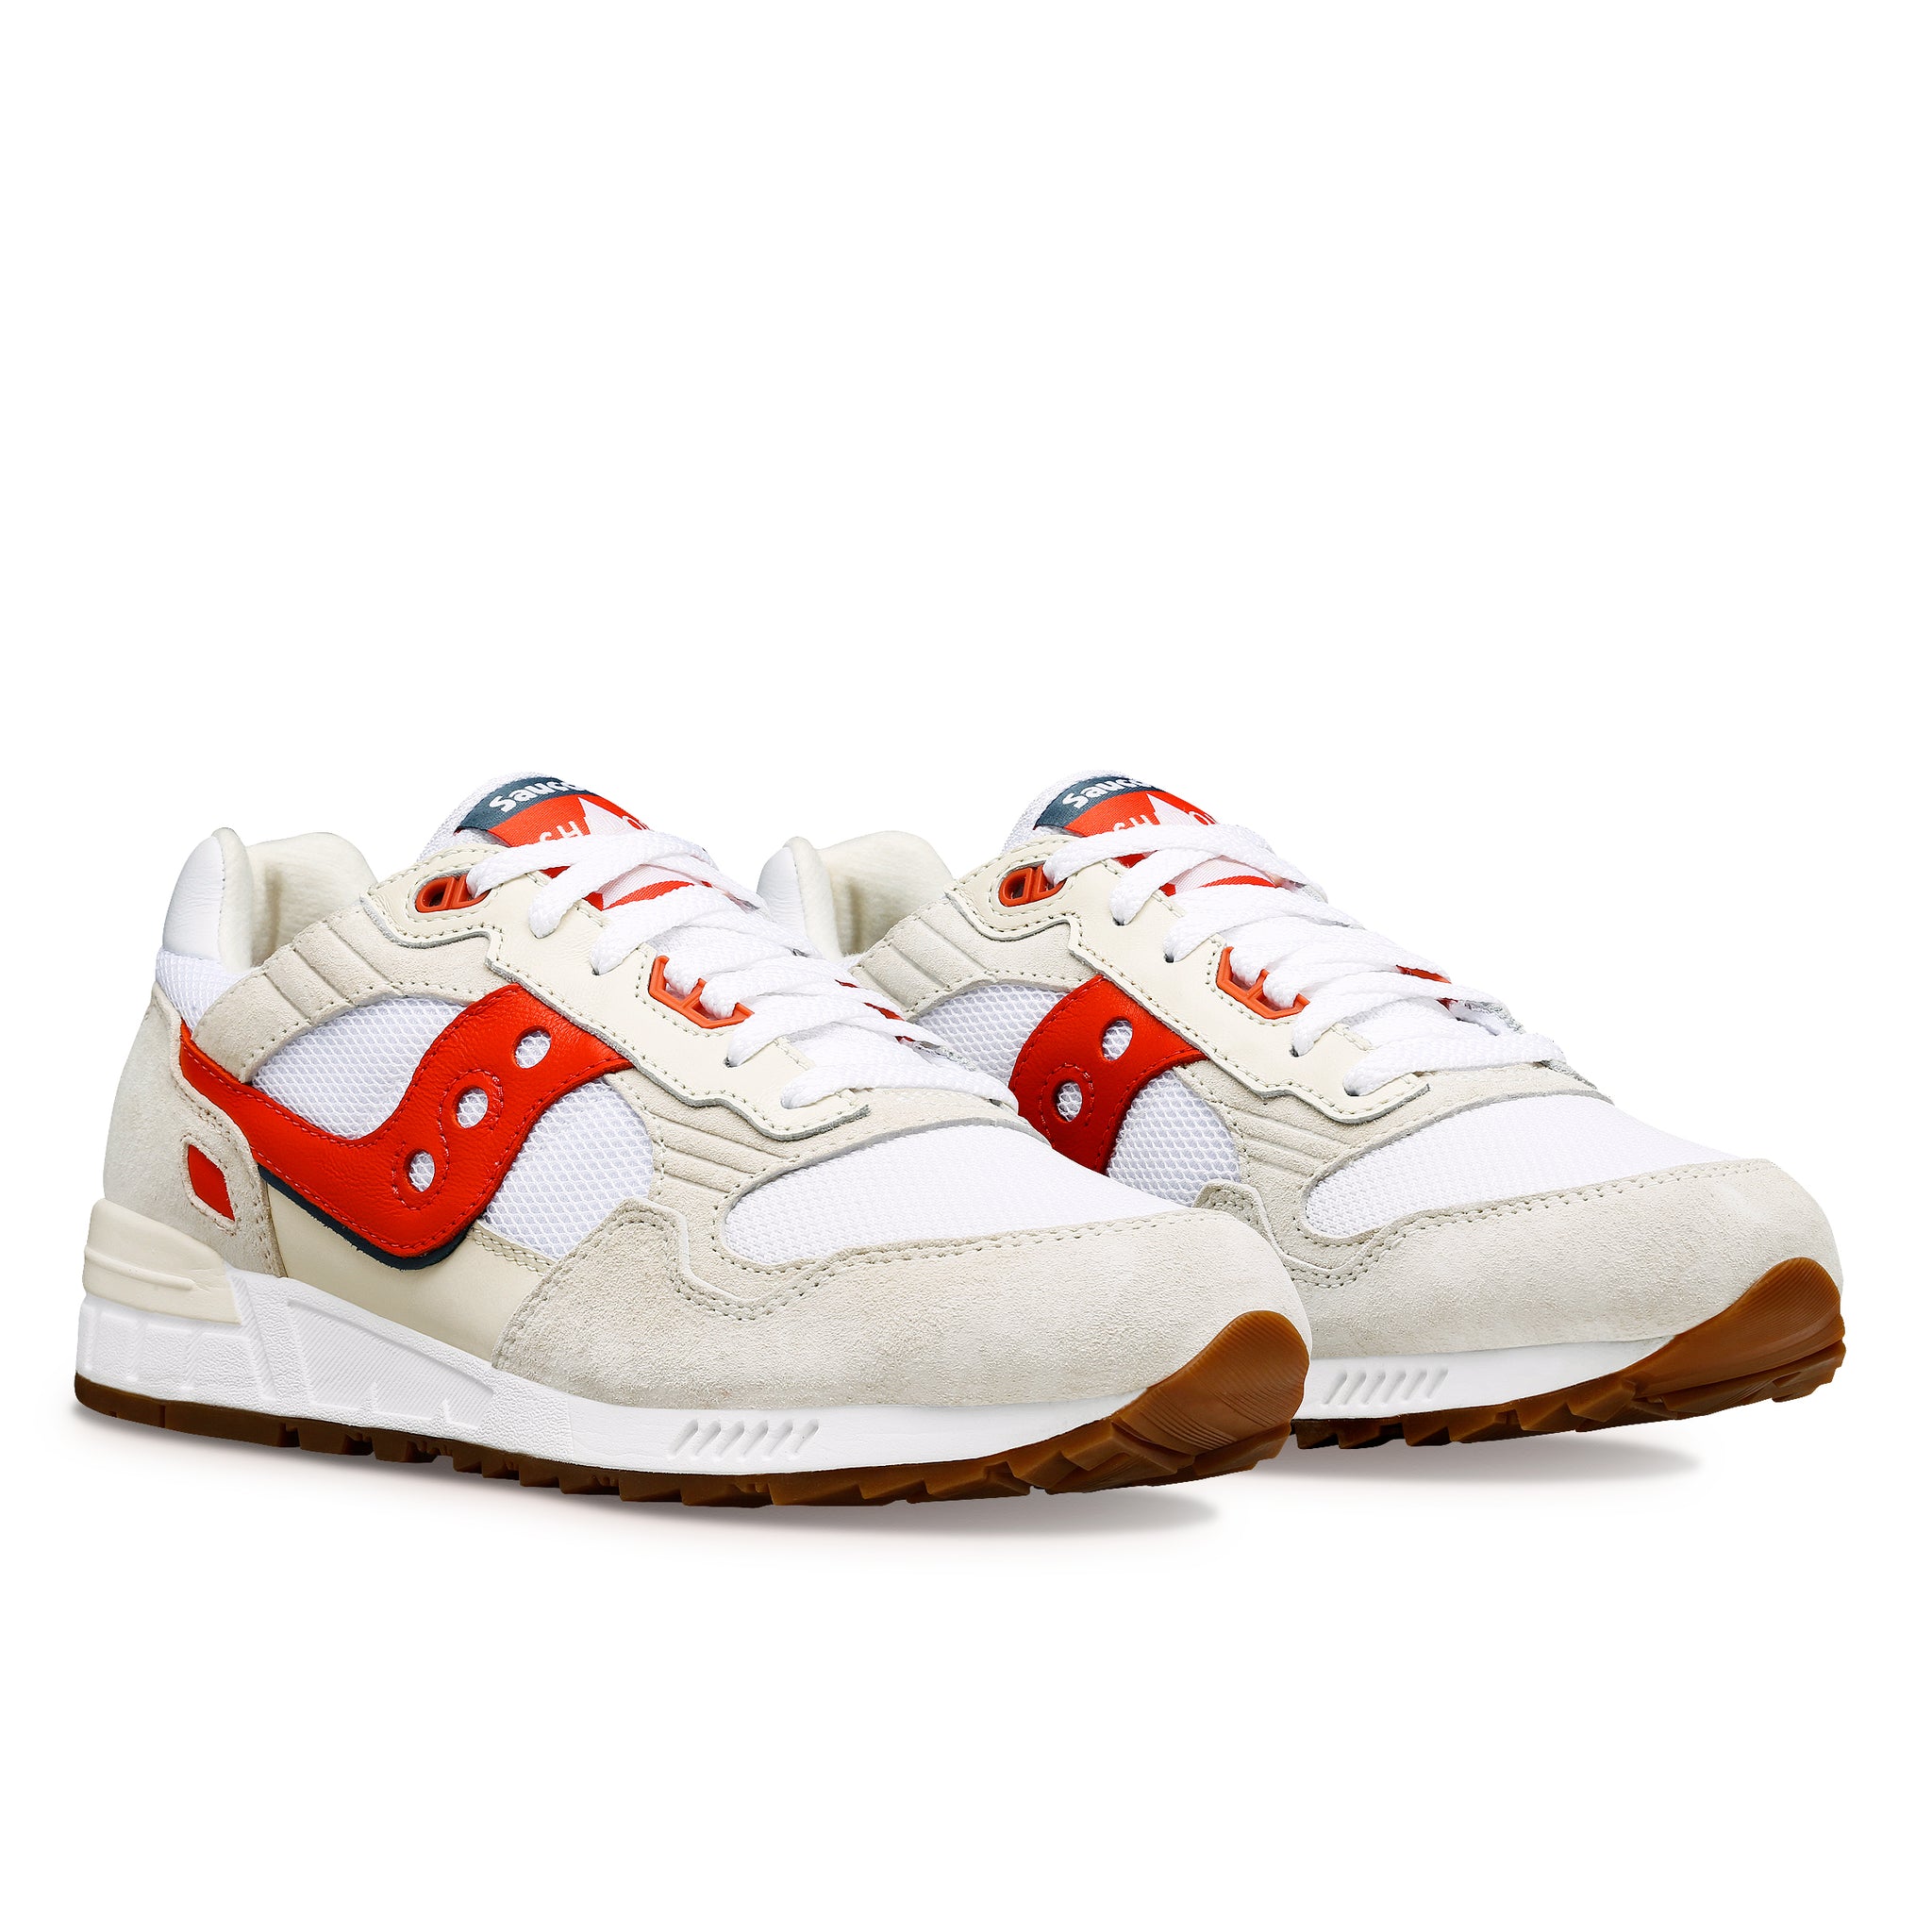 Saucony Shadow 5000 in White and Red